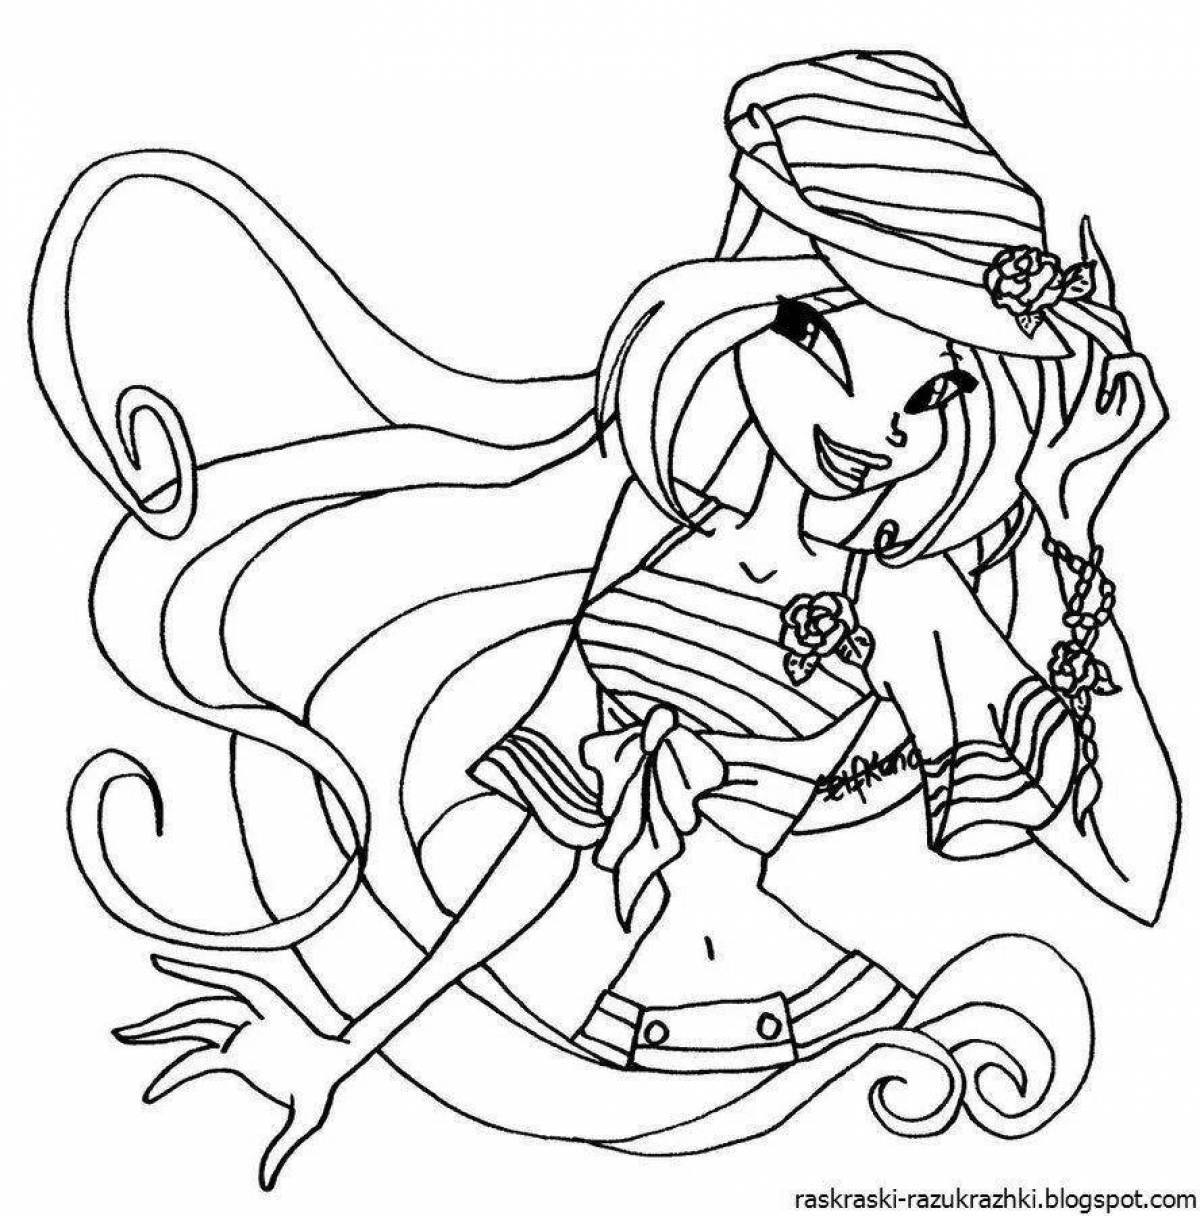 Club coloring page